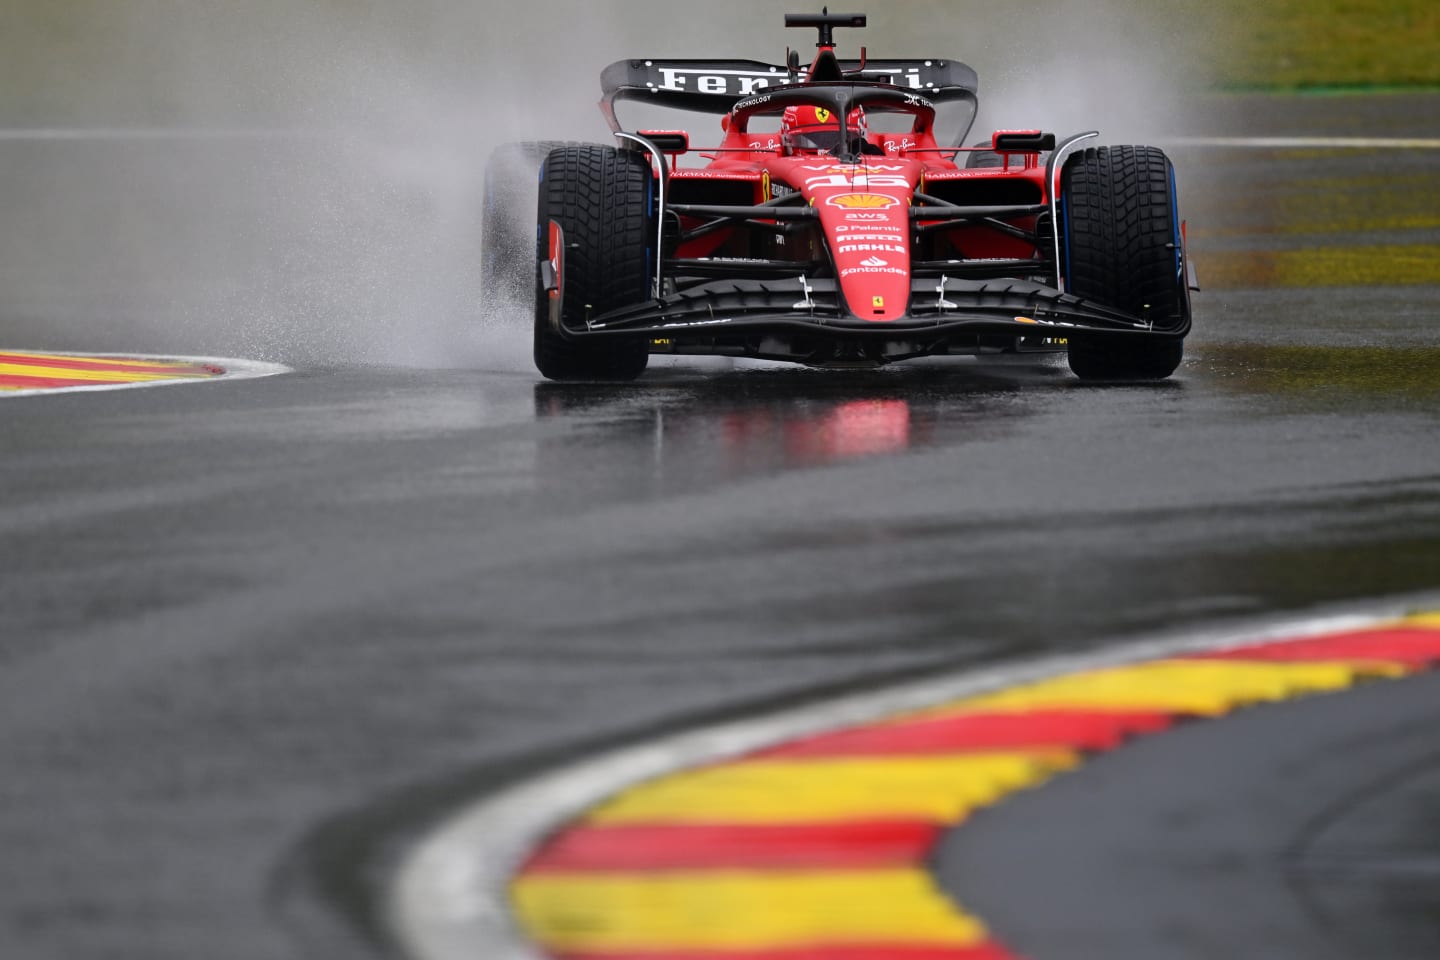 SPA, BELGIUM - JULY 28: Charles Leclerc of Monaco driving the (16) Ferrari SF-23 on track during